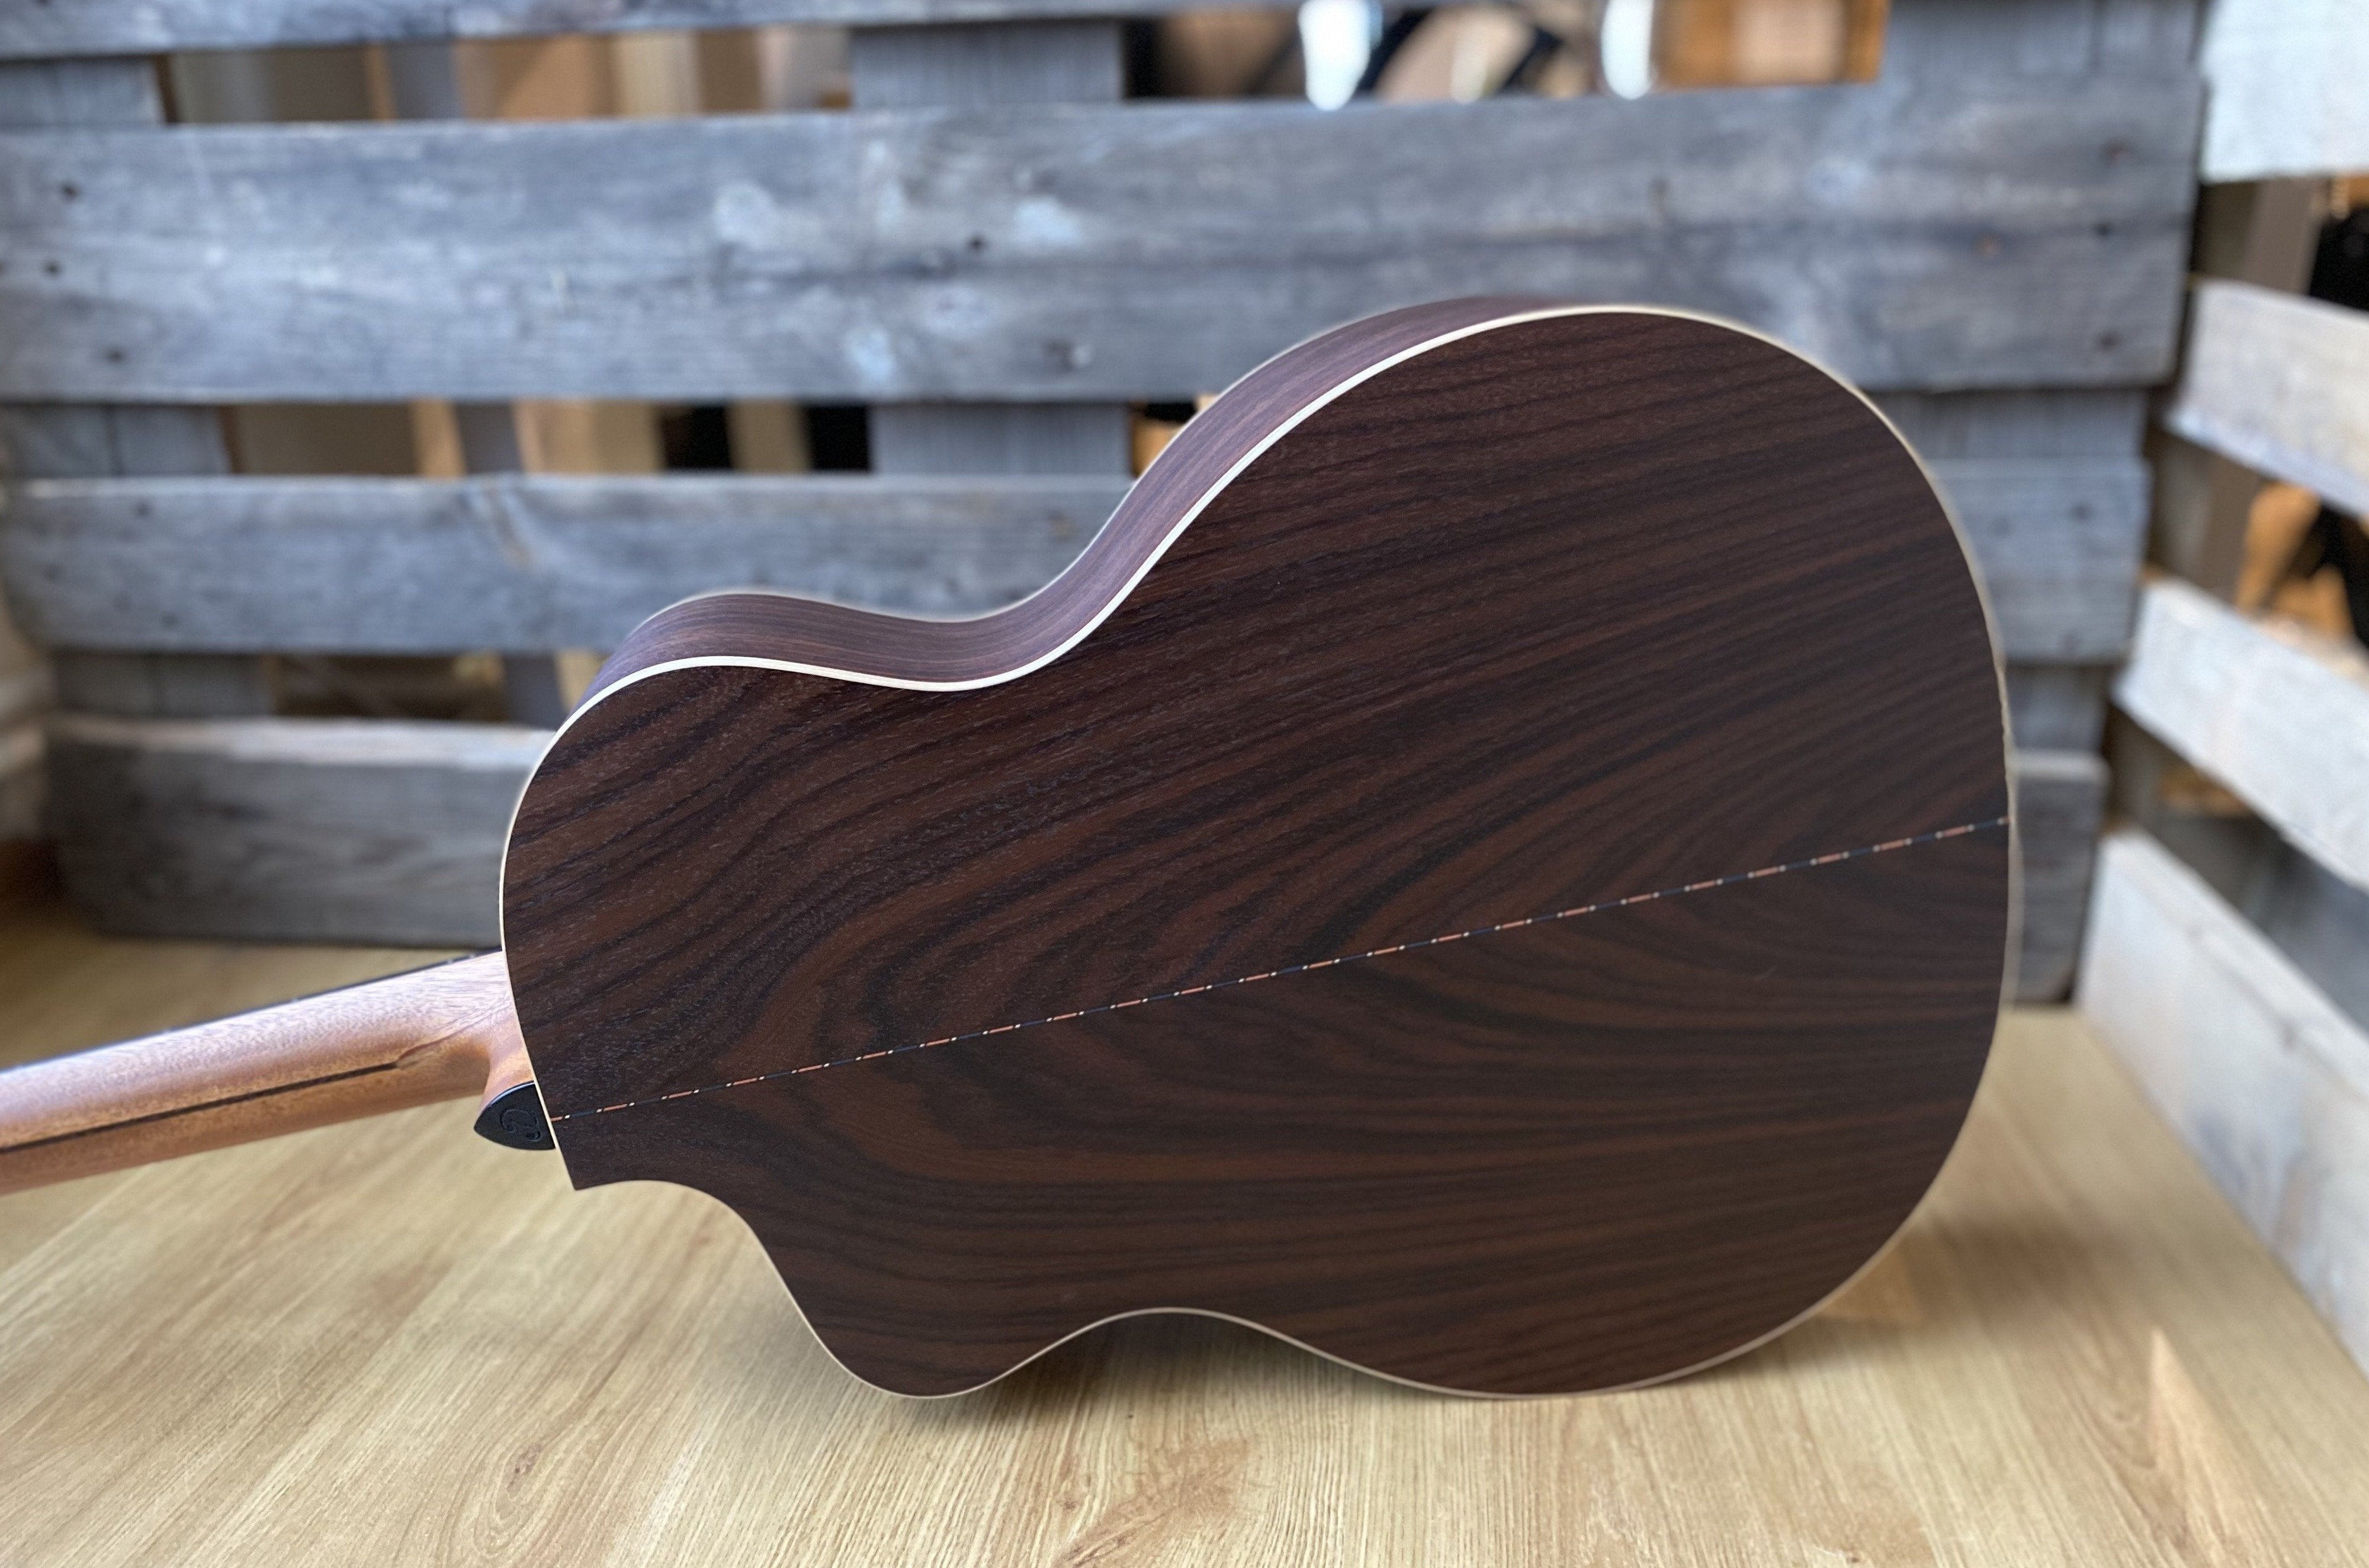 Dowina Rosewood (Ceres) GAC-SE, Electro Acoustic Guitar for sale at Richards Guitars.